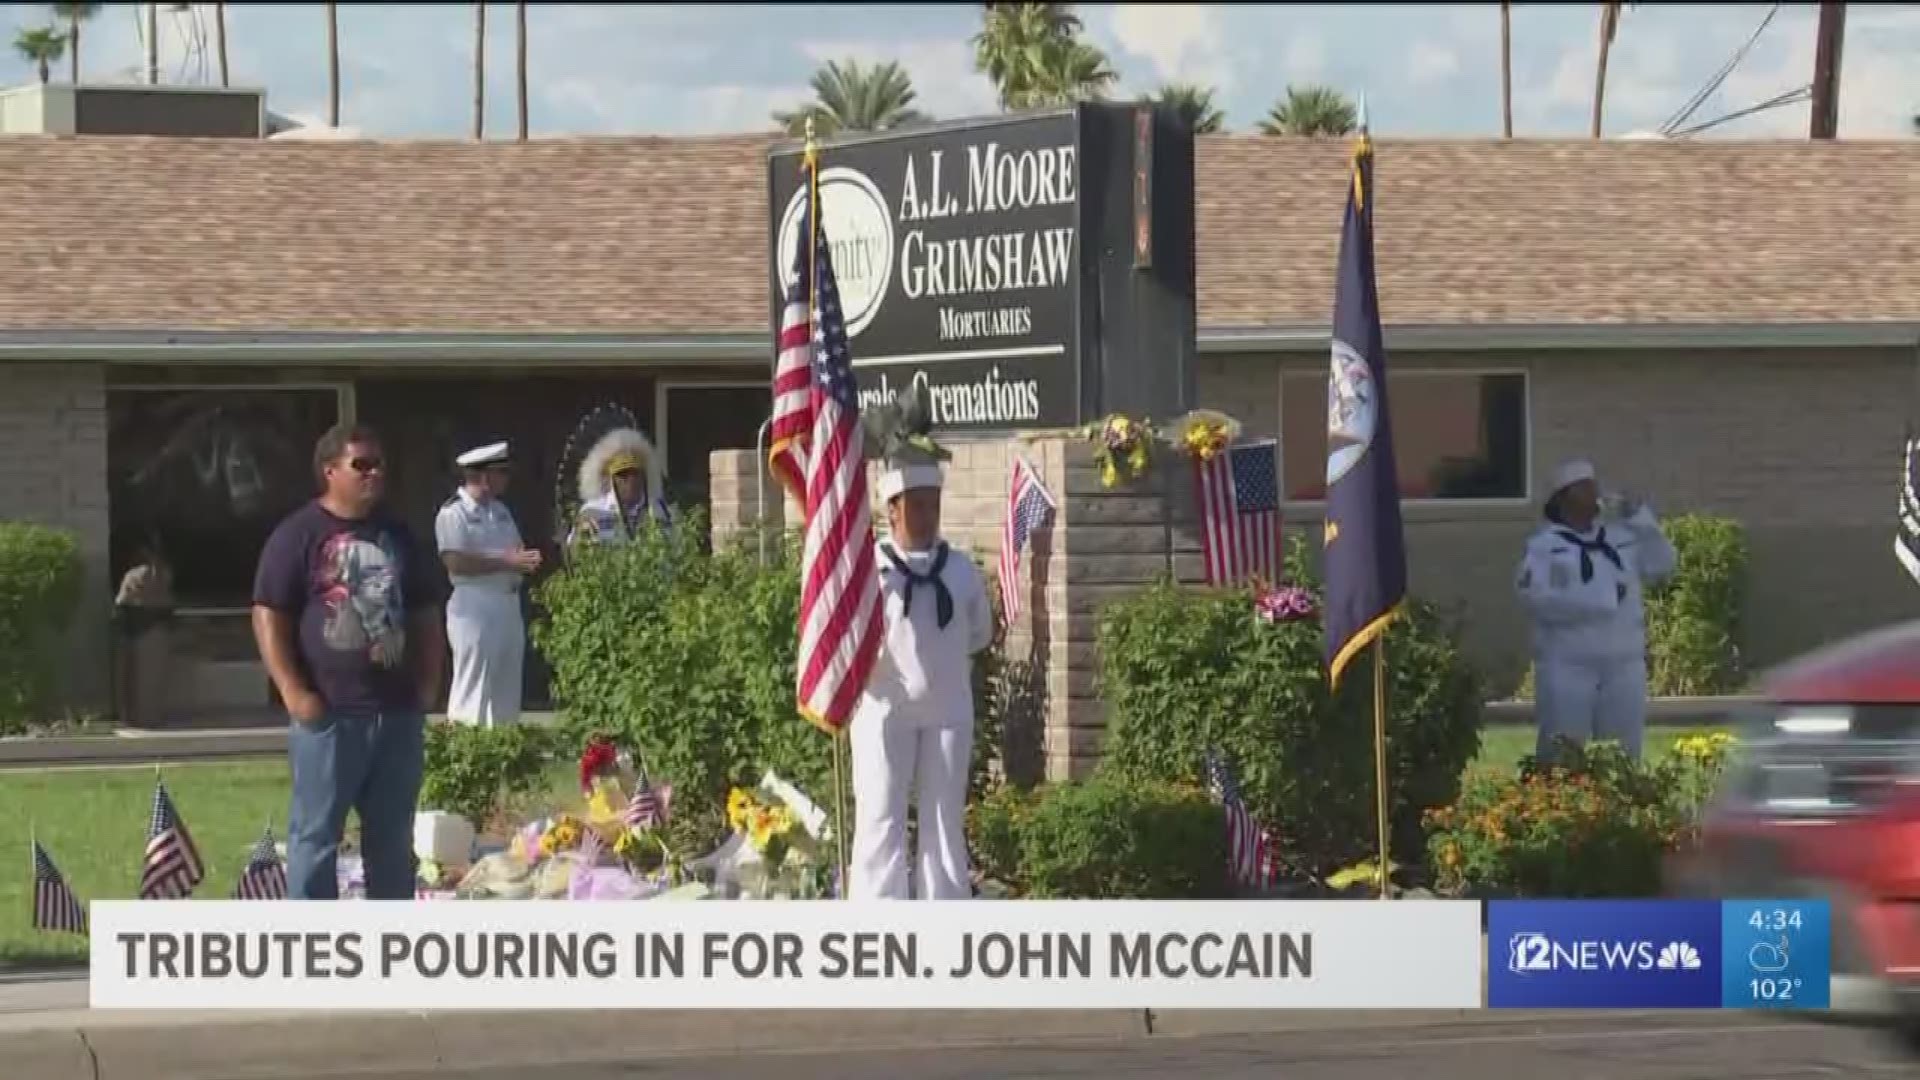 People are paying their respects to Sen. John McCain as veteran and war hero.